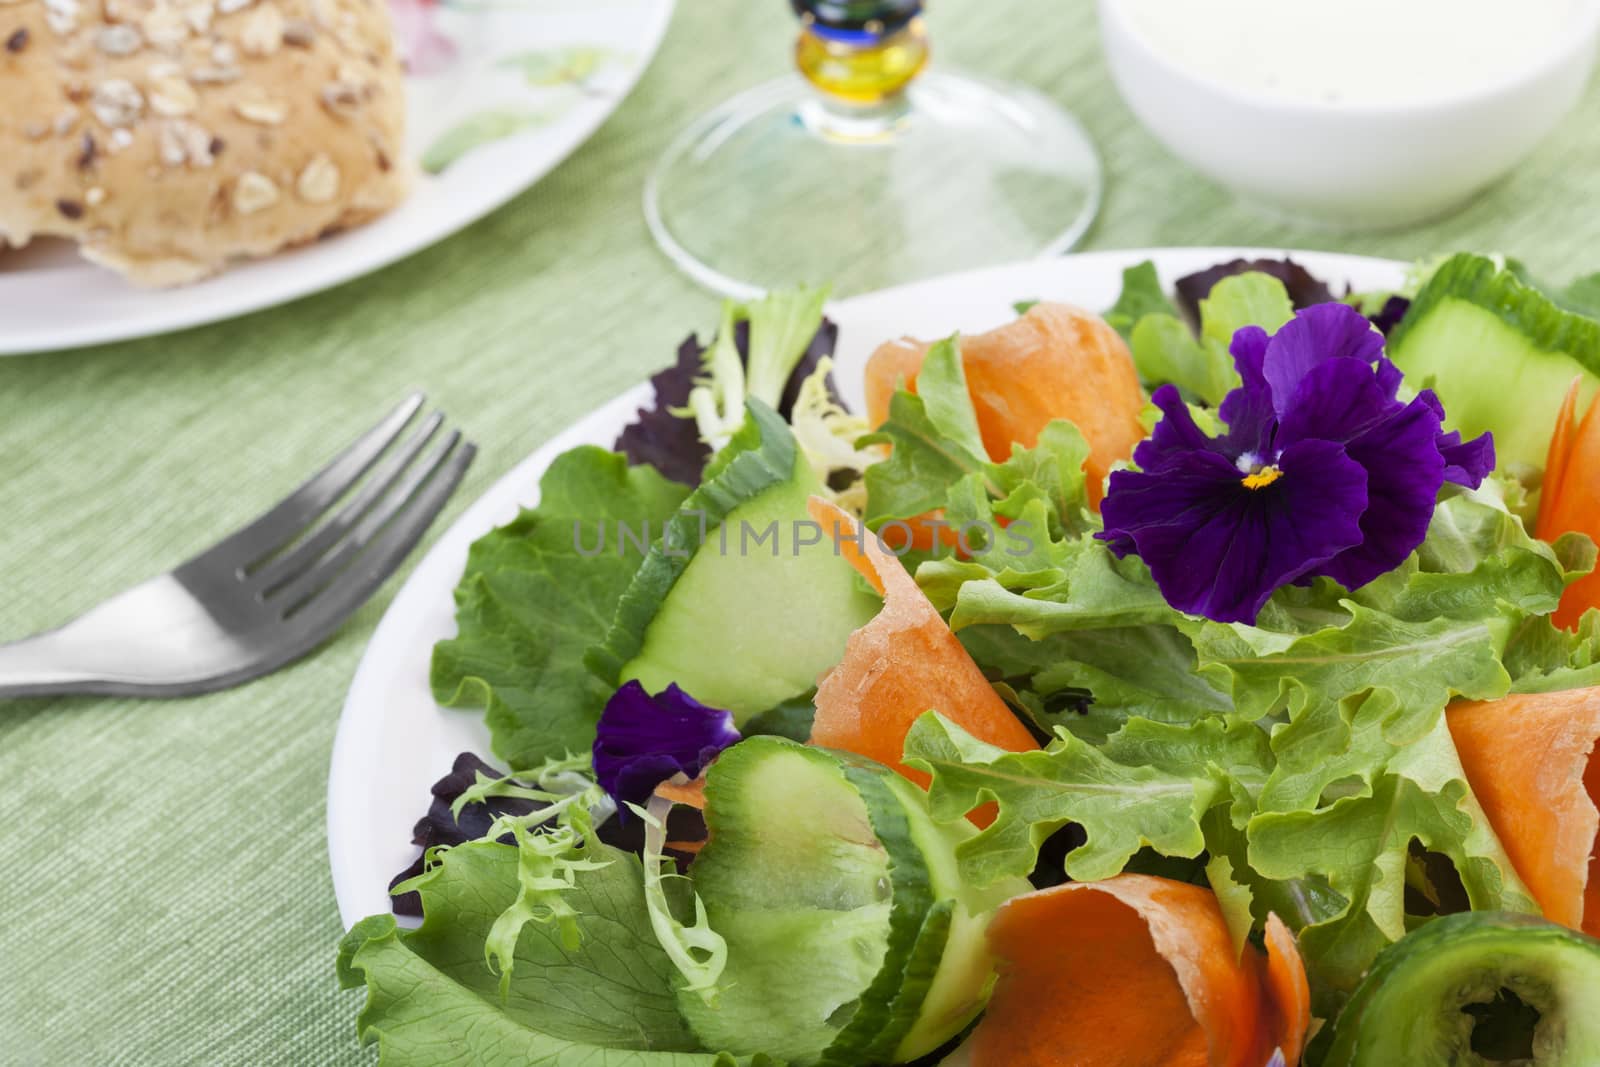 Various baby greens form the base of this salad, with carrot and cucumber curls adding color and texture.  Edible pansy flowers add the finishing touch to this fresh spring eating experience.